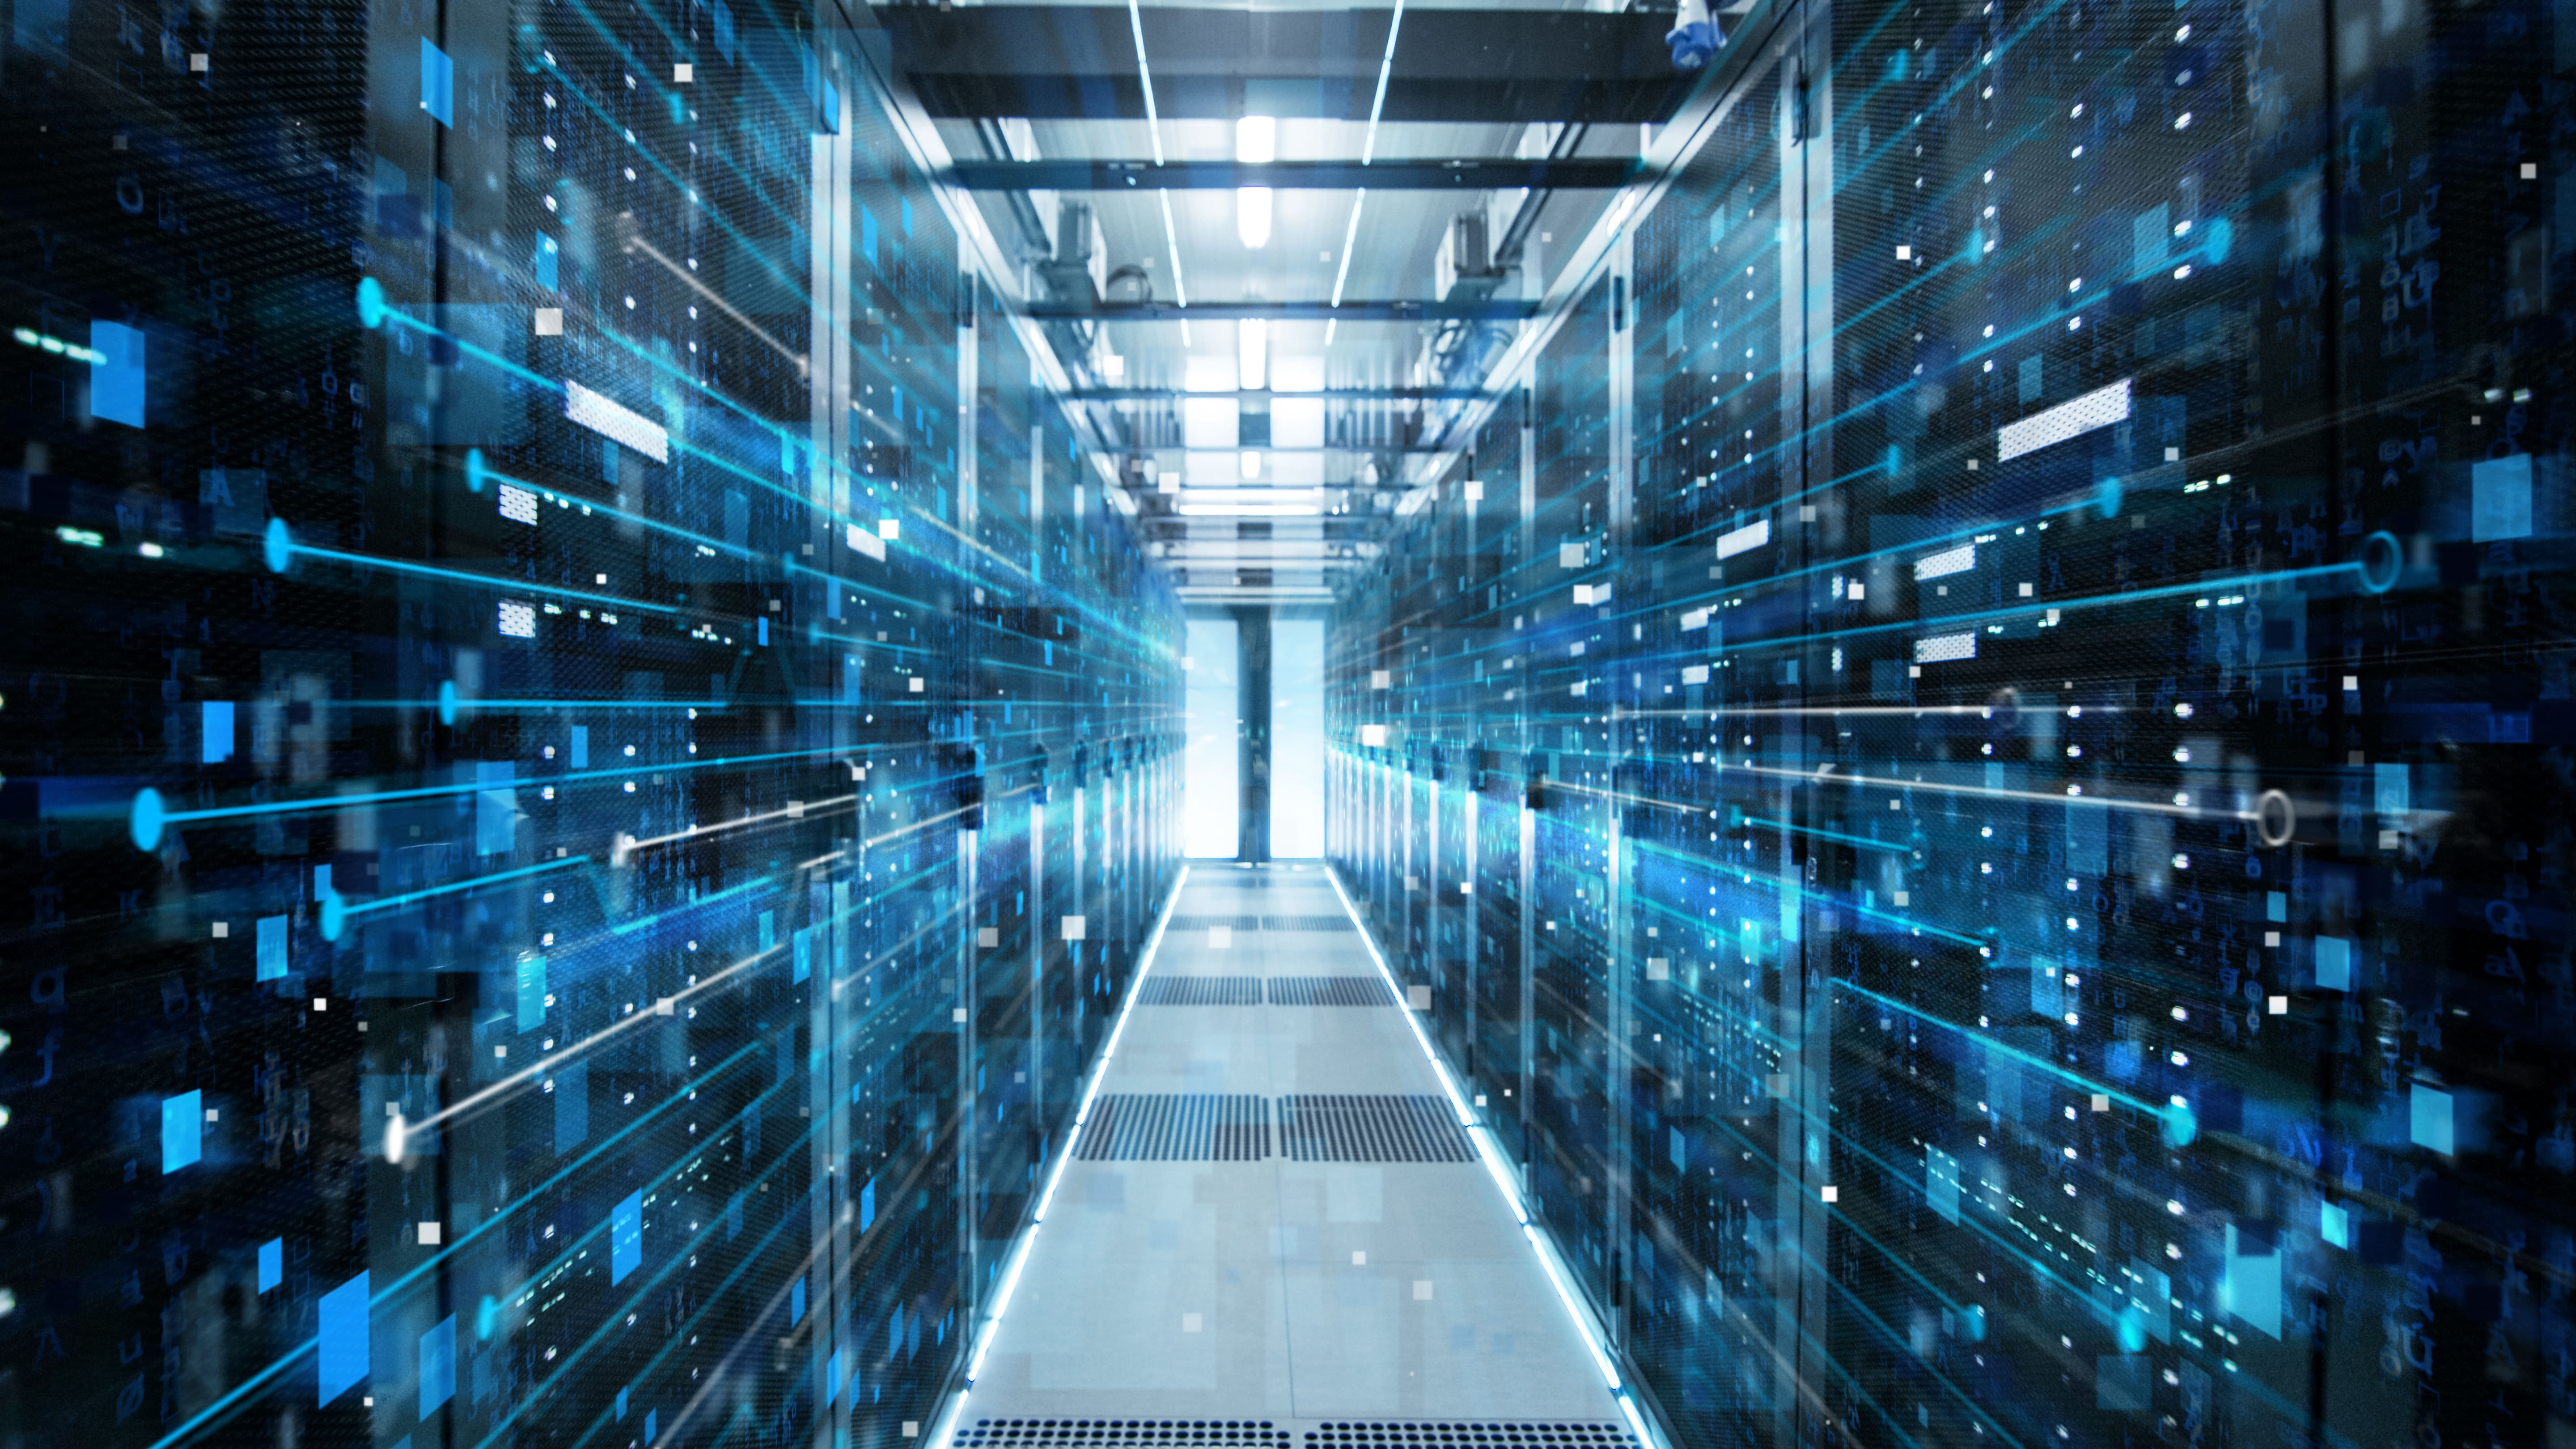 A data center stores the data securely.